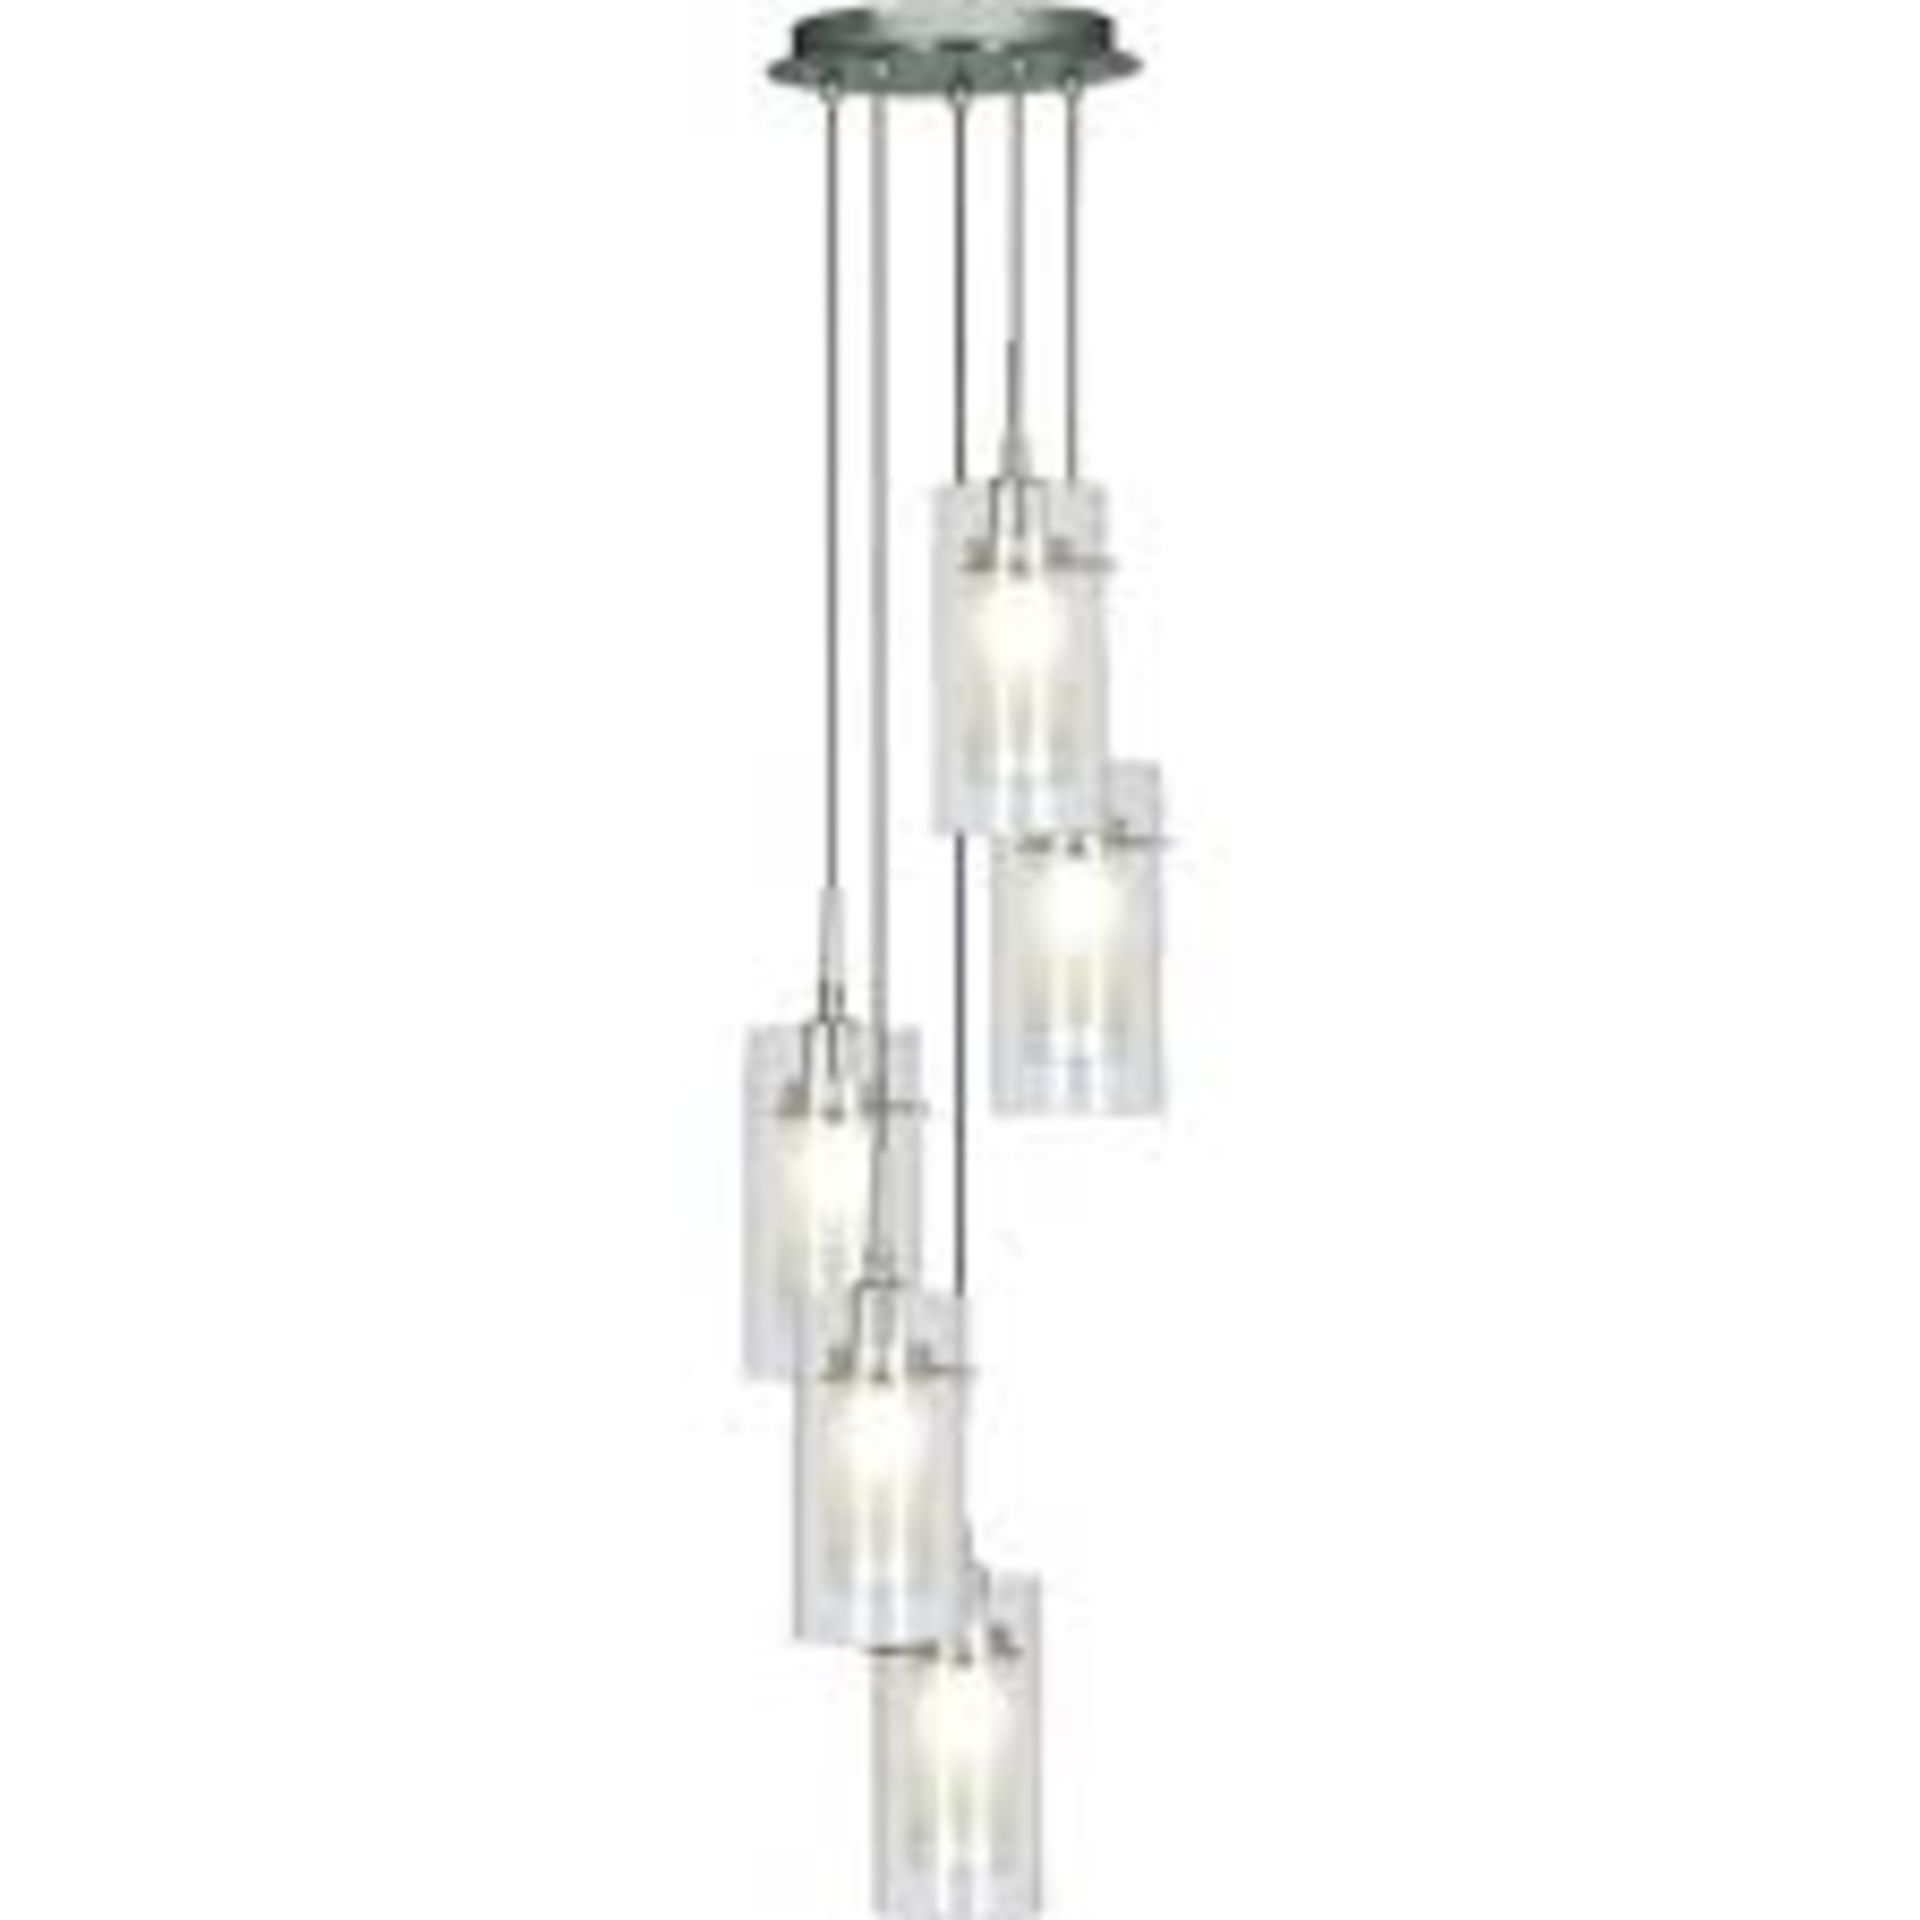 1 x Searchlight Duo 1 Double glass light pendant - Ref: 2305-5 - New and Boxed stock - RRP: £160 - Image 4 of 4